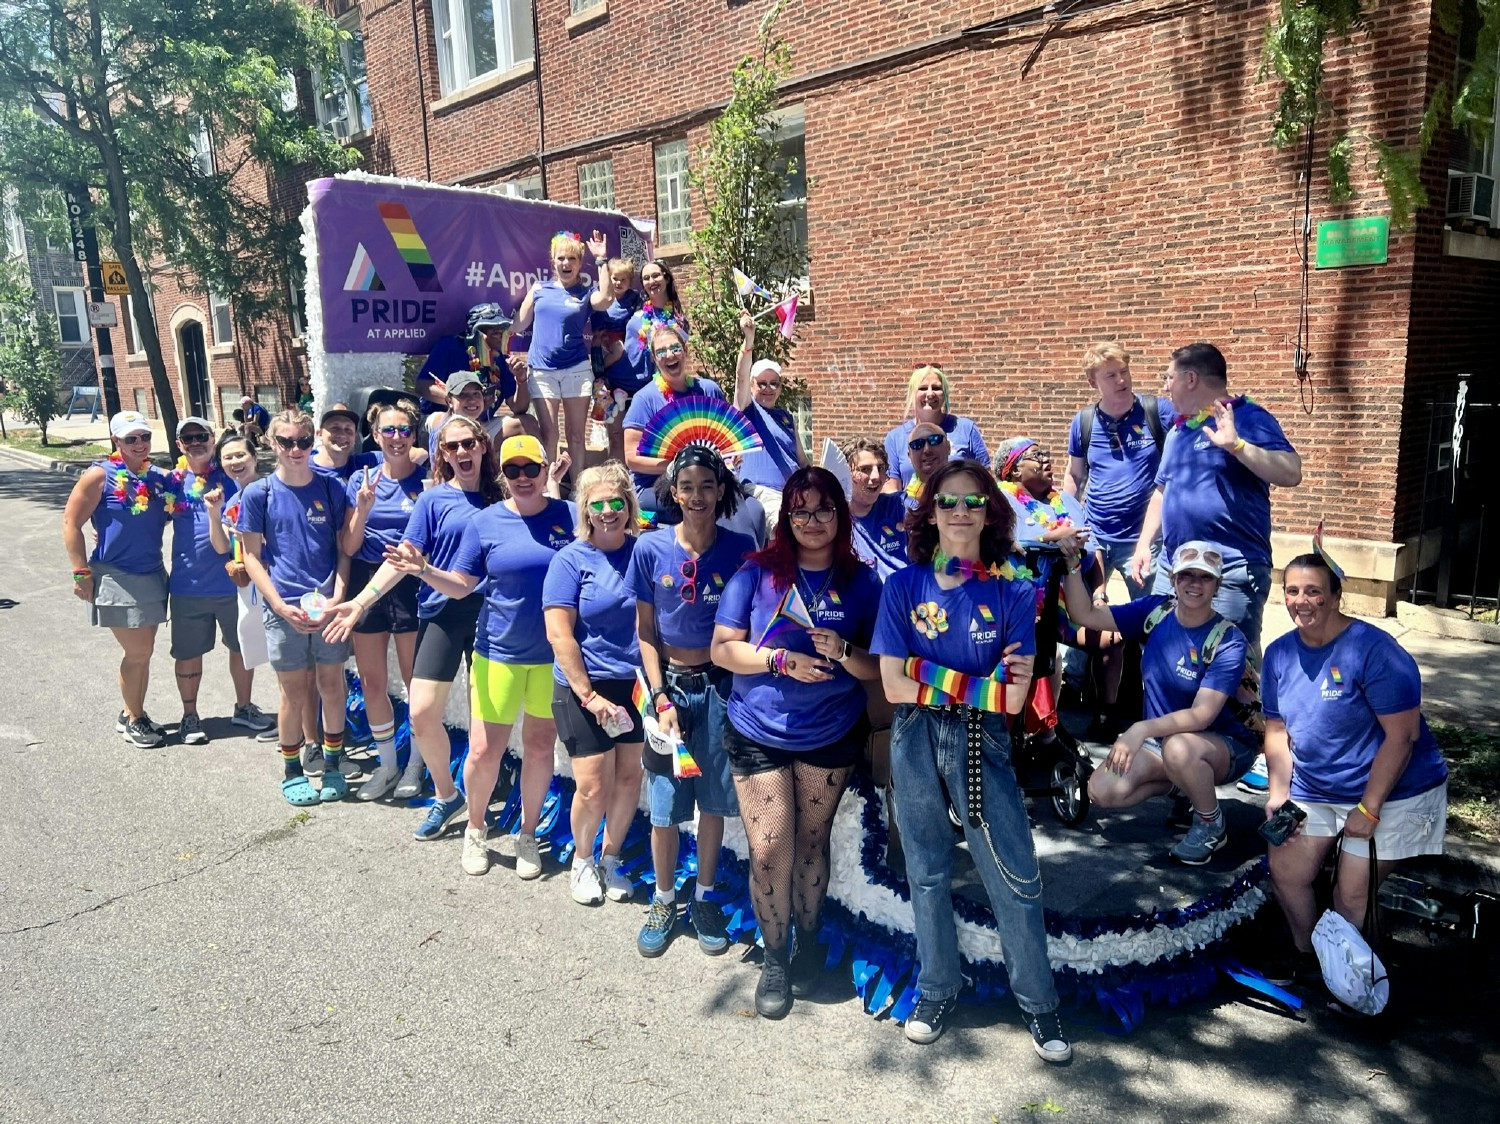 Team Applied shows up loud and proud for the Chicago Pride Parade